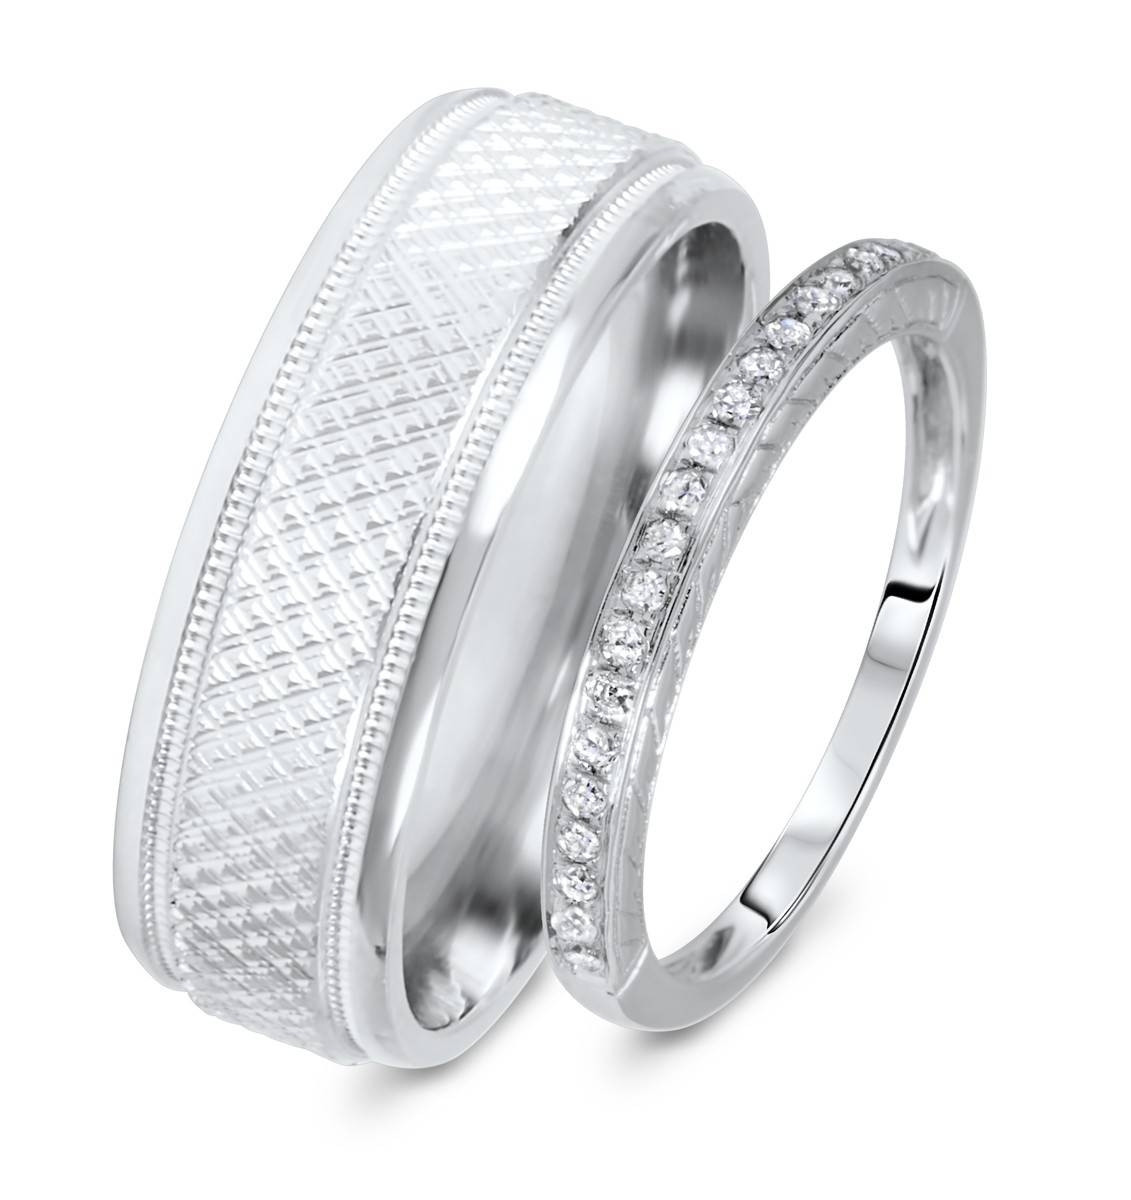 Cheap Wedding Ring Sets His And Hers
 15 Inspirations of Cheap Wedding Bands Sets His And Hers